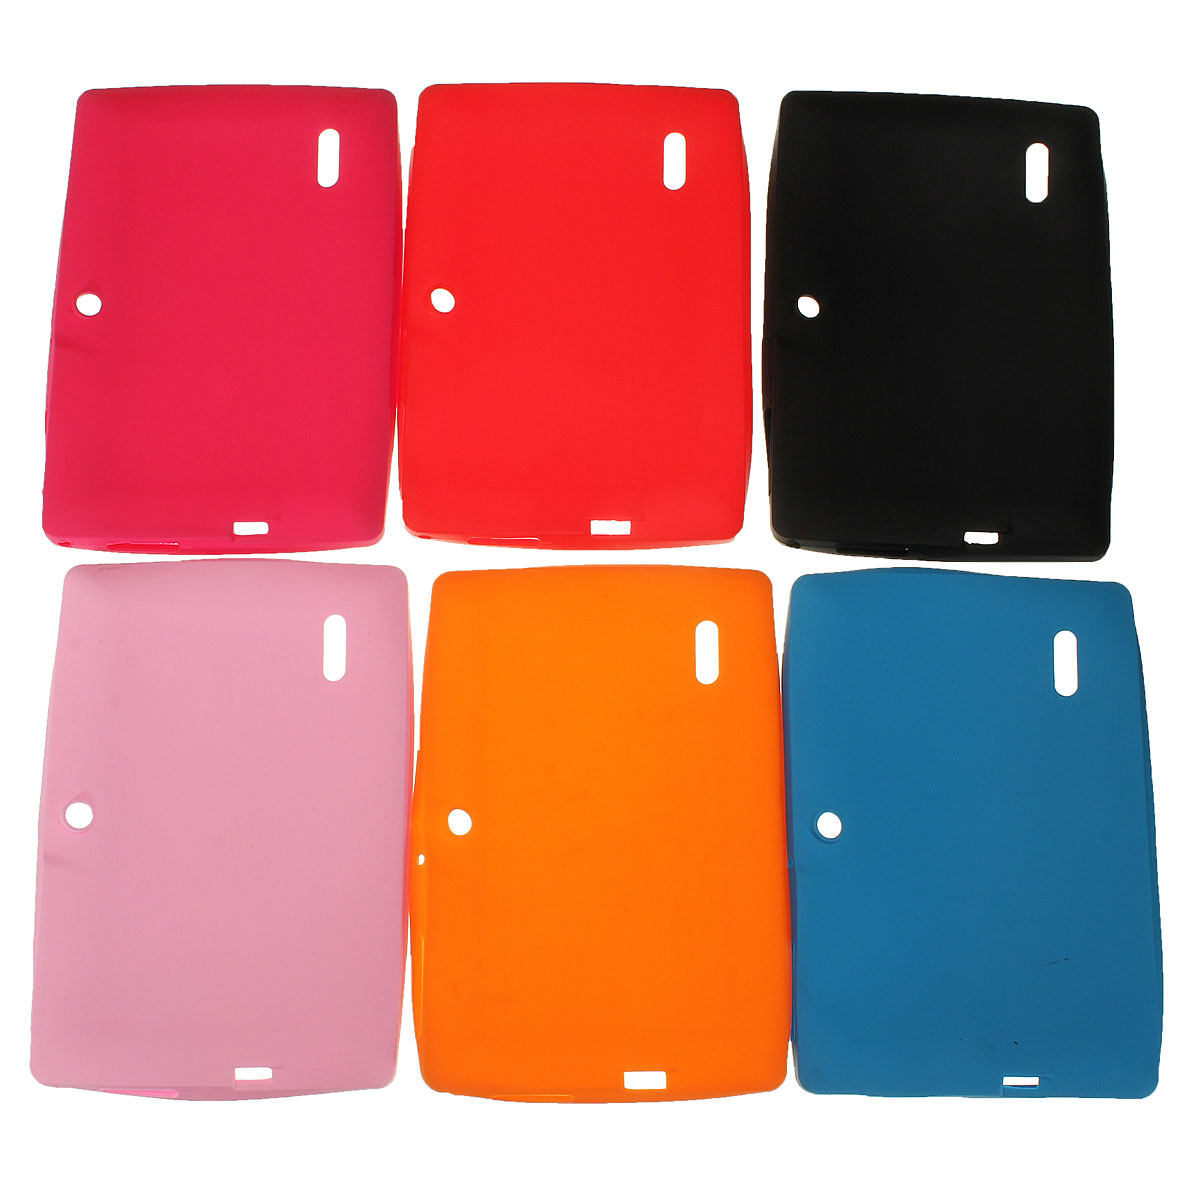 Multi-color-Soft-Silicone-Protective-Back-Cover-Case-For-7-Inch-Tablet-PC-1974994-6